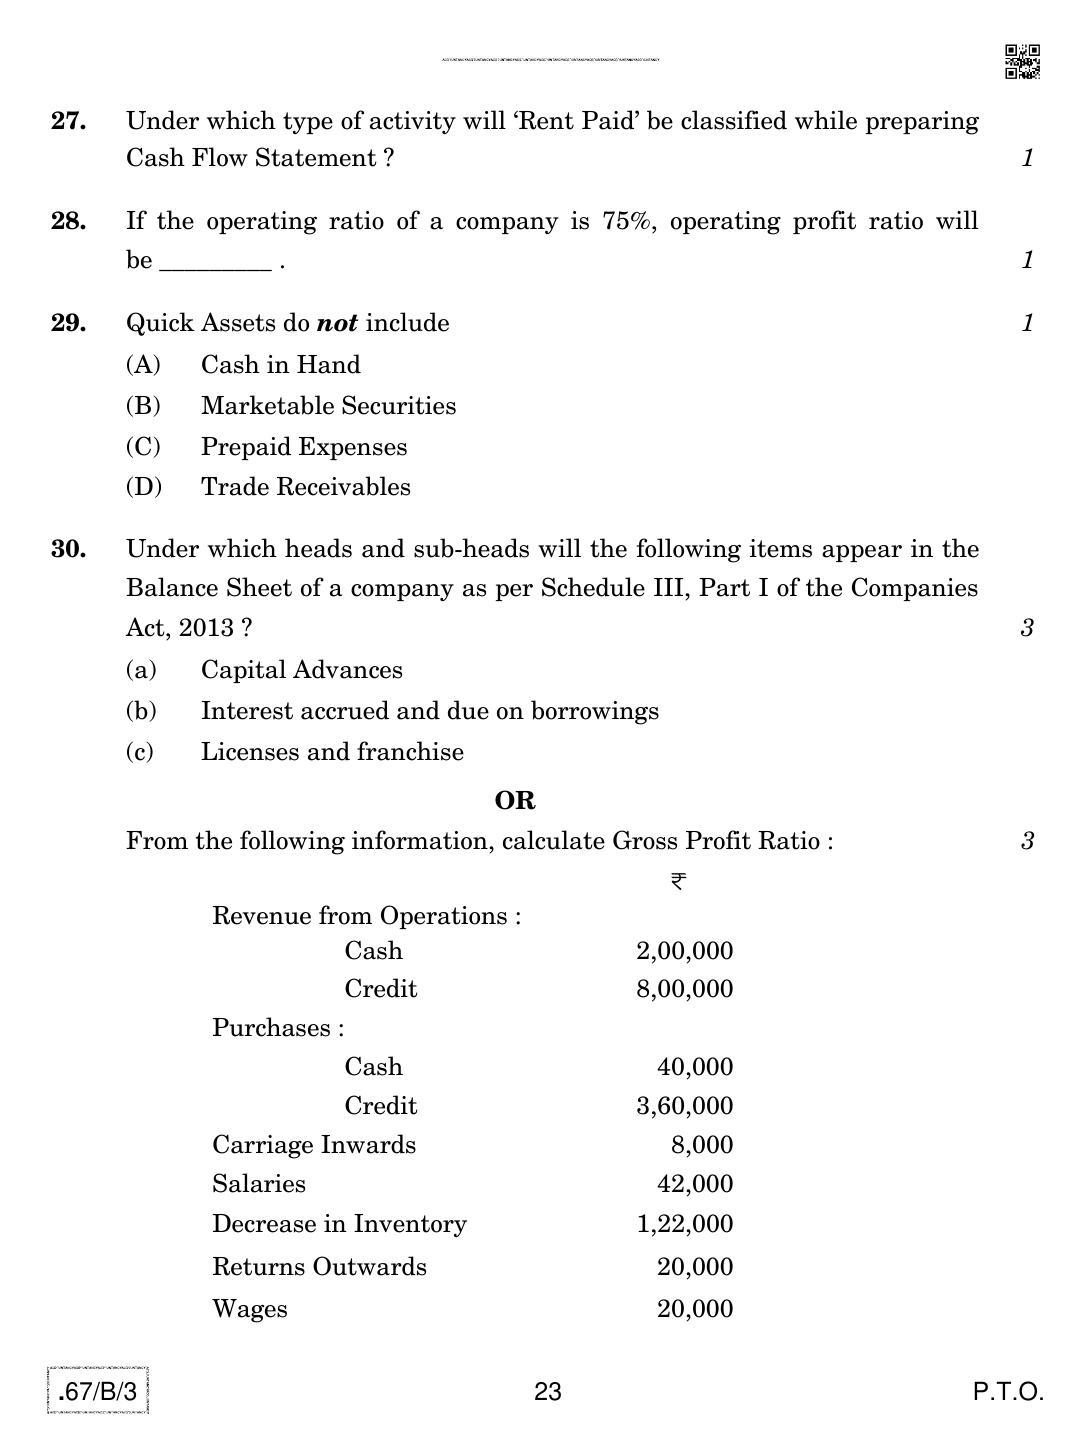 CBSE Class 12 67-C-3 - Accountancy 2020 Compartment Question Paper - Page 23